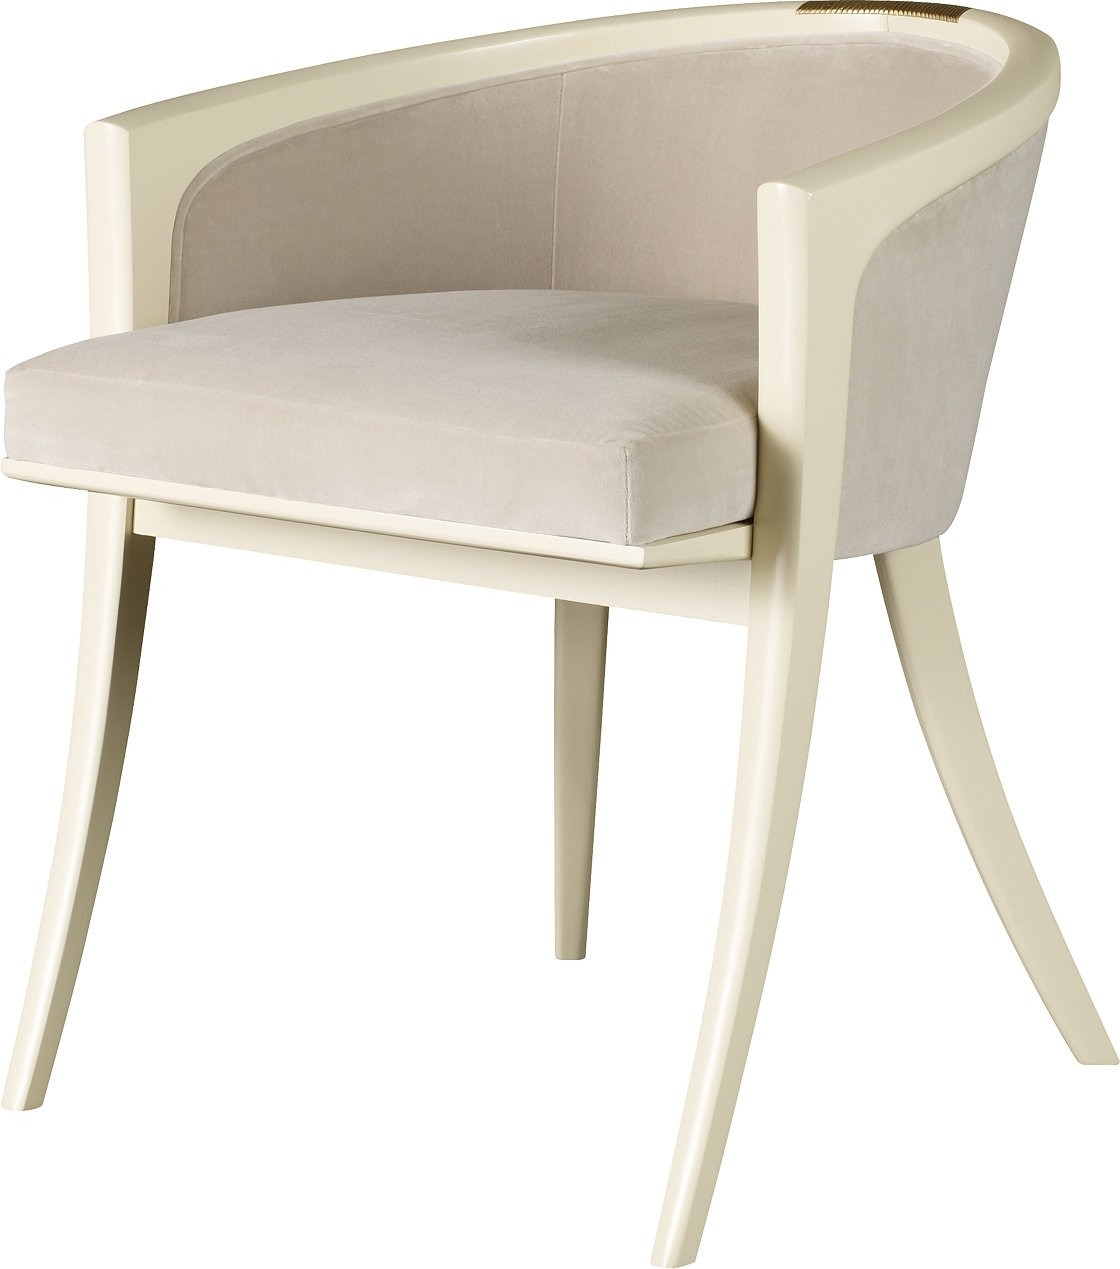 The diana vanity chair is just perfect